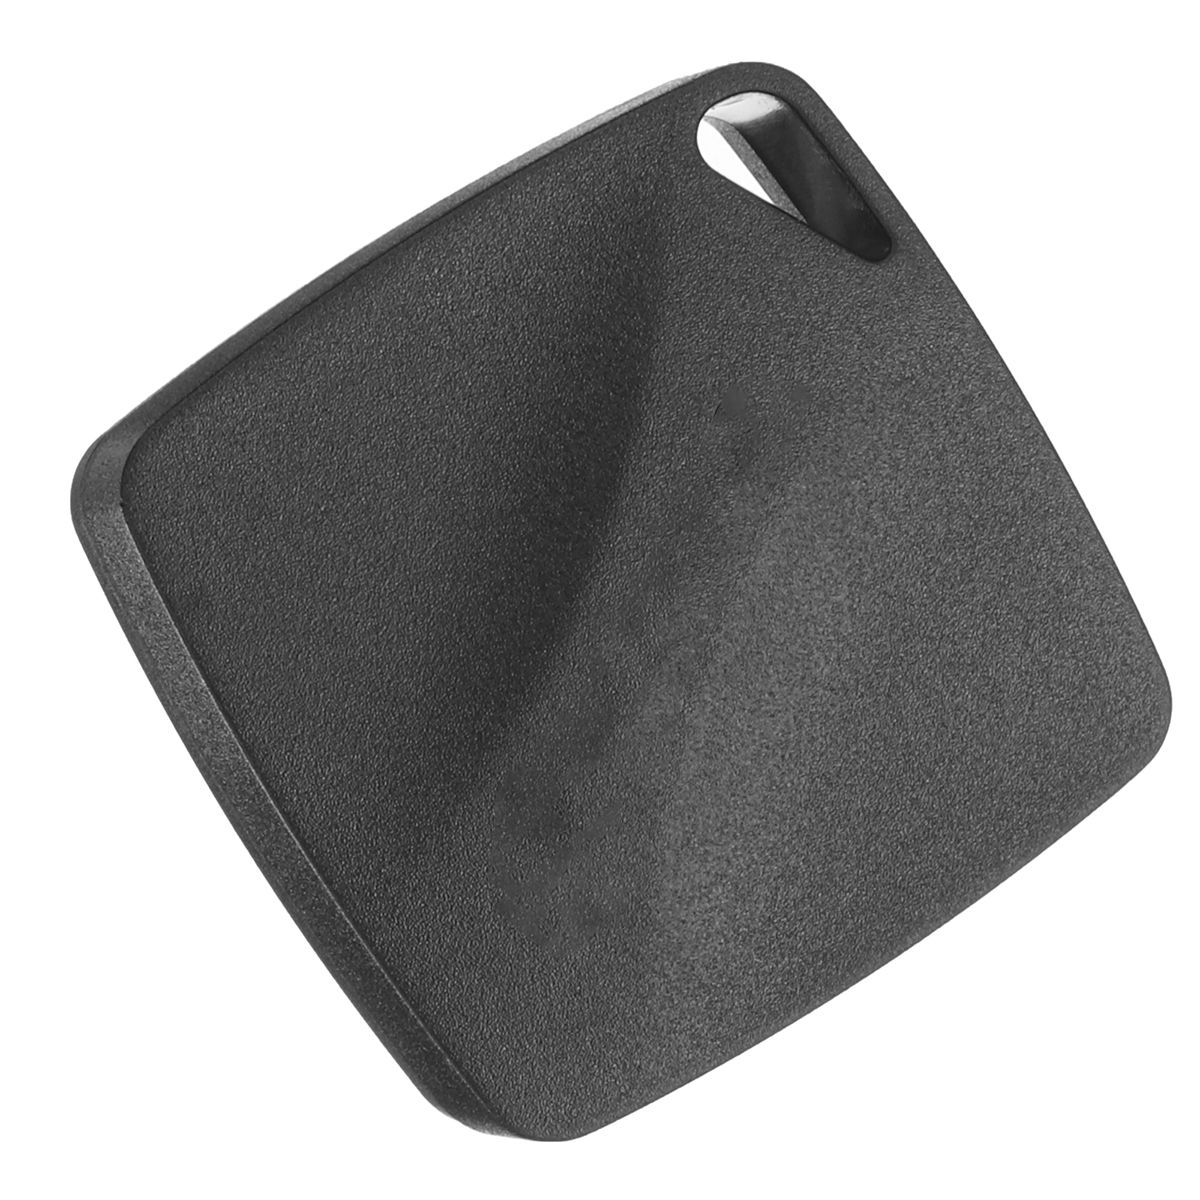 Square-Waterproof-Black-Tracking-Device-Base-Station-Positioning-Location-1725758